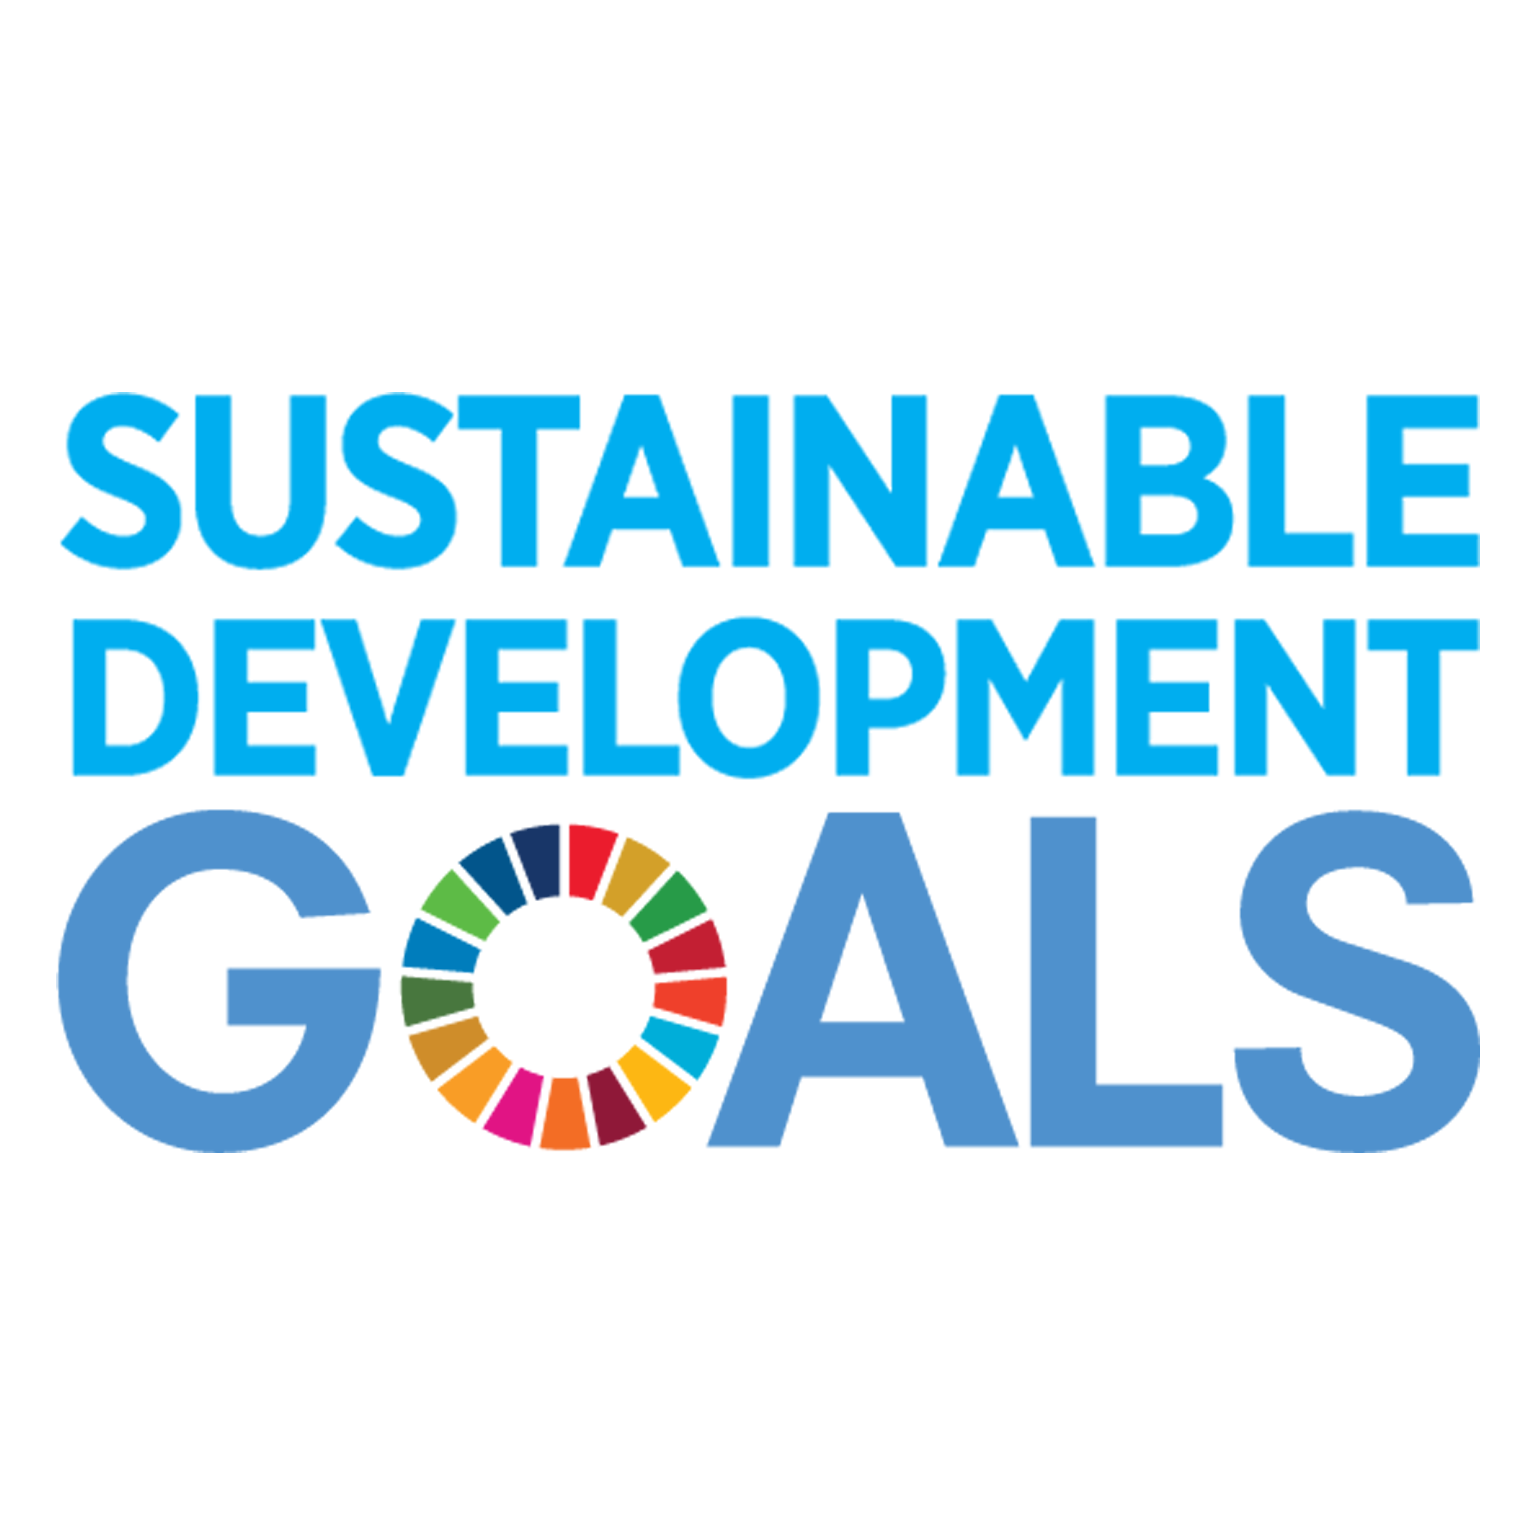 Sustainable Development Goals - 17 goals with 169 associated targets